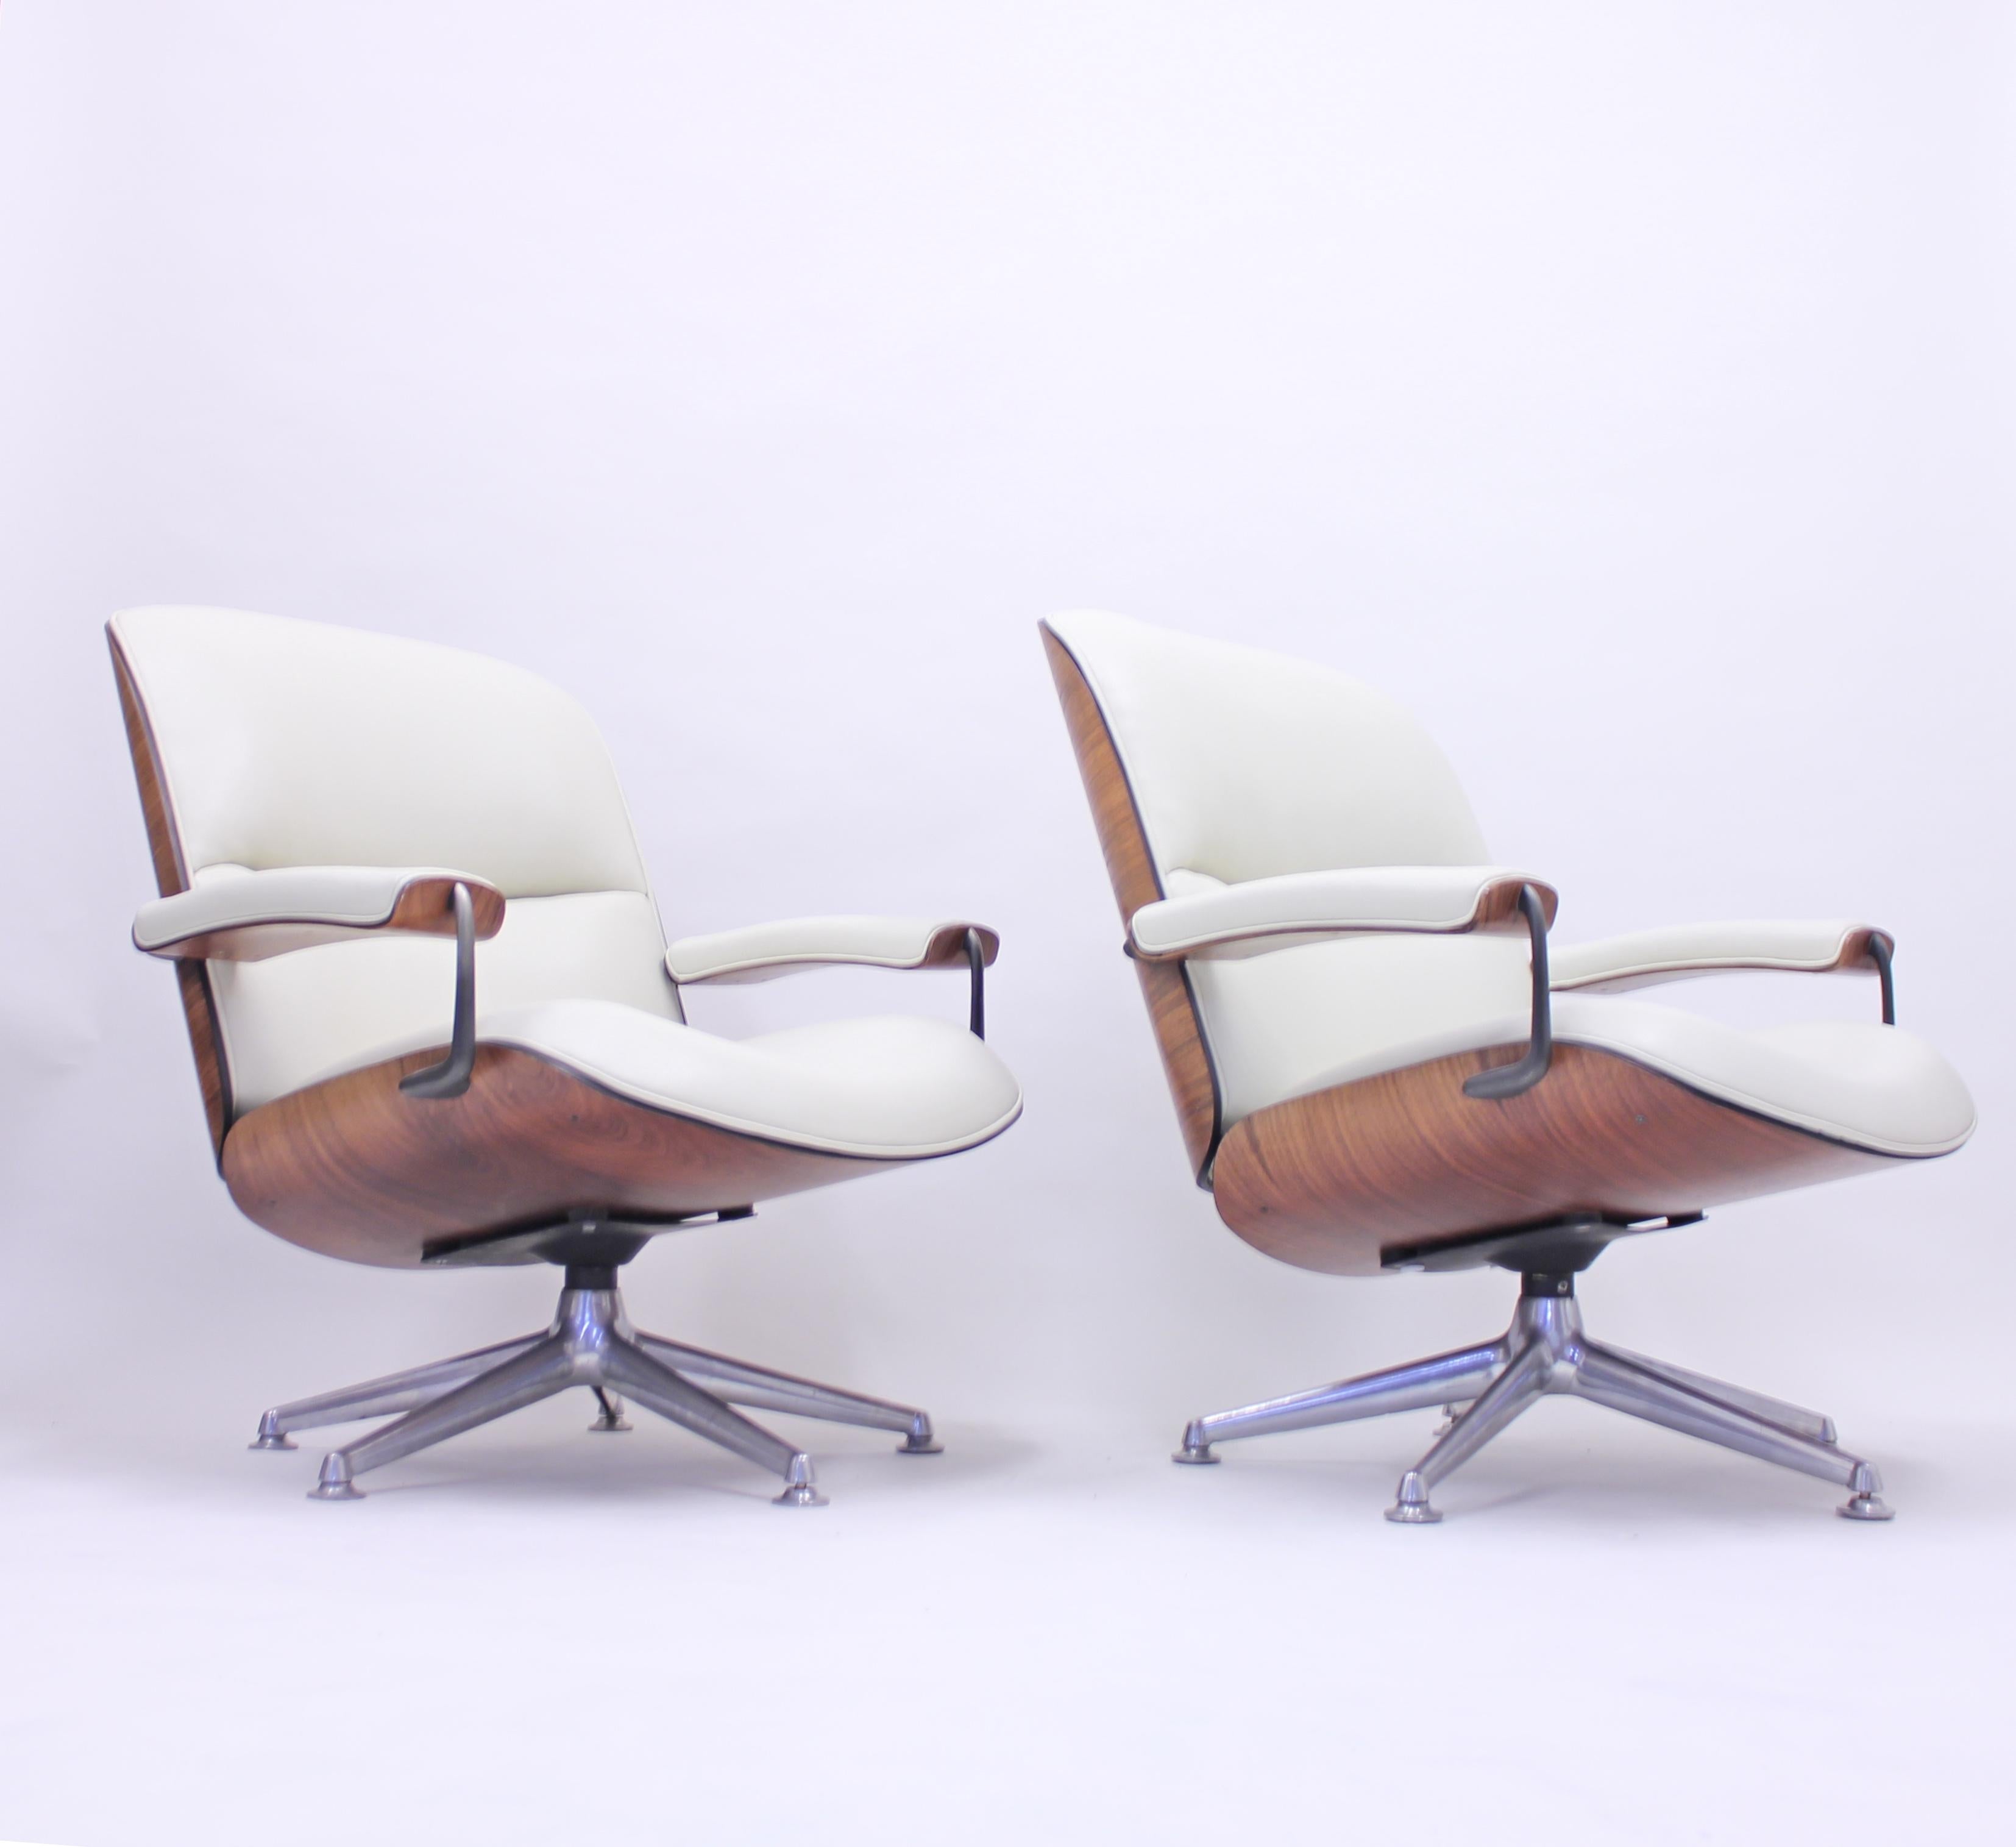 Pair of swivel lounge chairs designed by husband and wife team Ico & Luisa Parisi for MIM Roma in the 1950s. In this series there are also taller and smaller desk chair but this is the more rare long chair variation. Newly upholstered in white